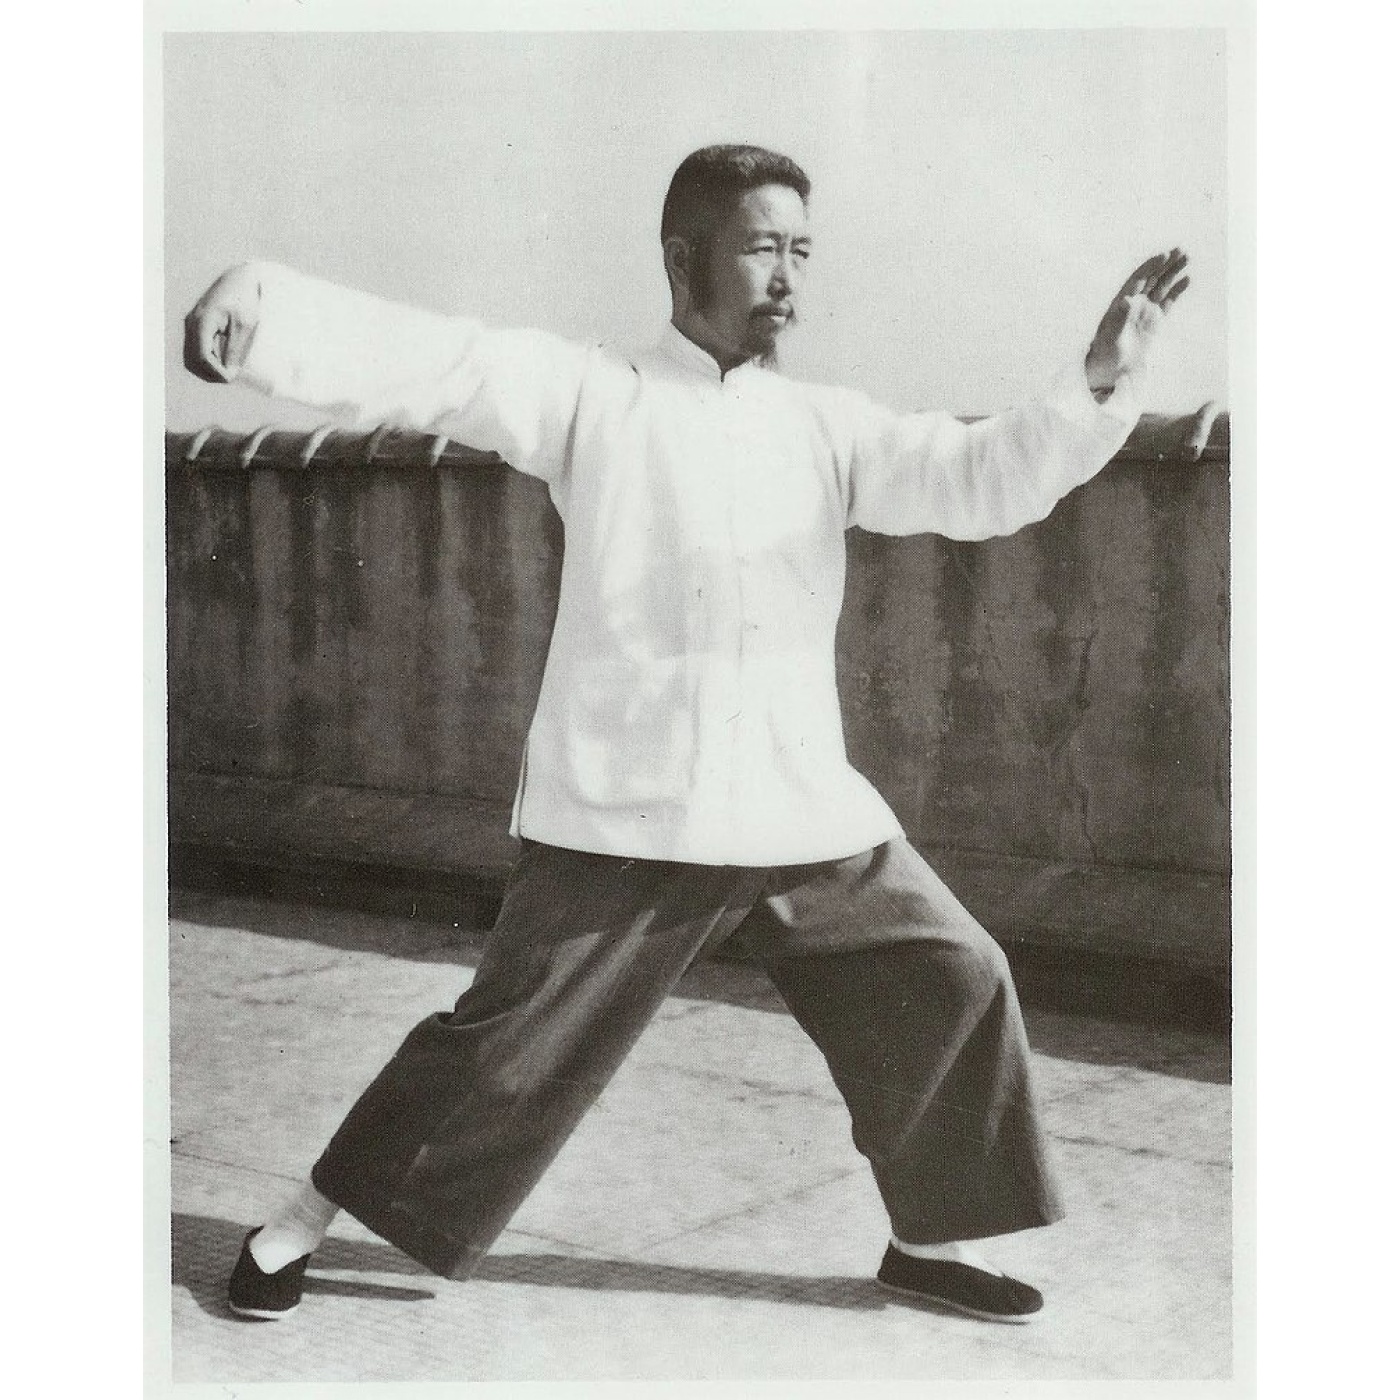 Cheng Man Ching was a renowned Chinese master who excelled in multiple disciplines, including poetry, painting, calligraphy, medicine, and the martial art of Taijiquan (Tai Chi).